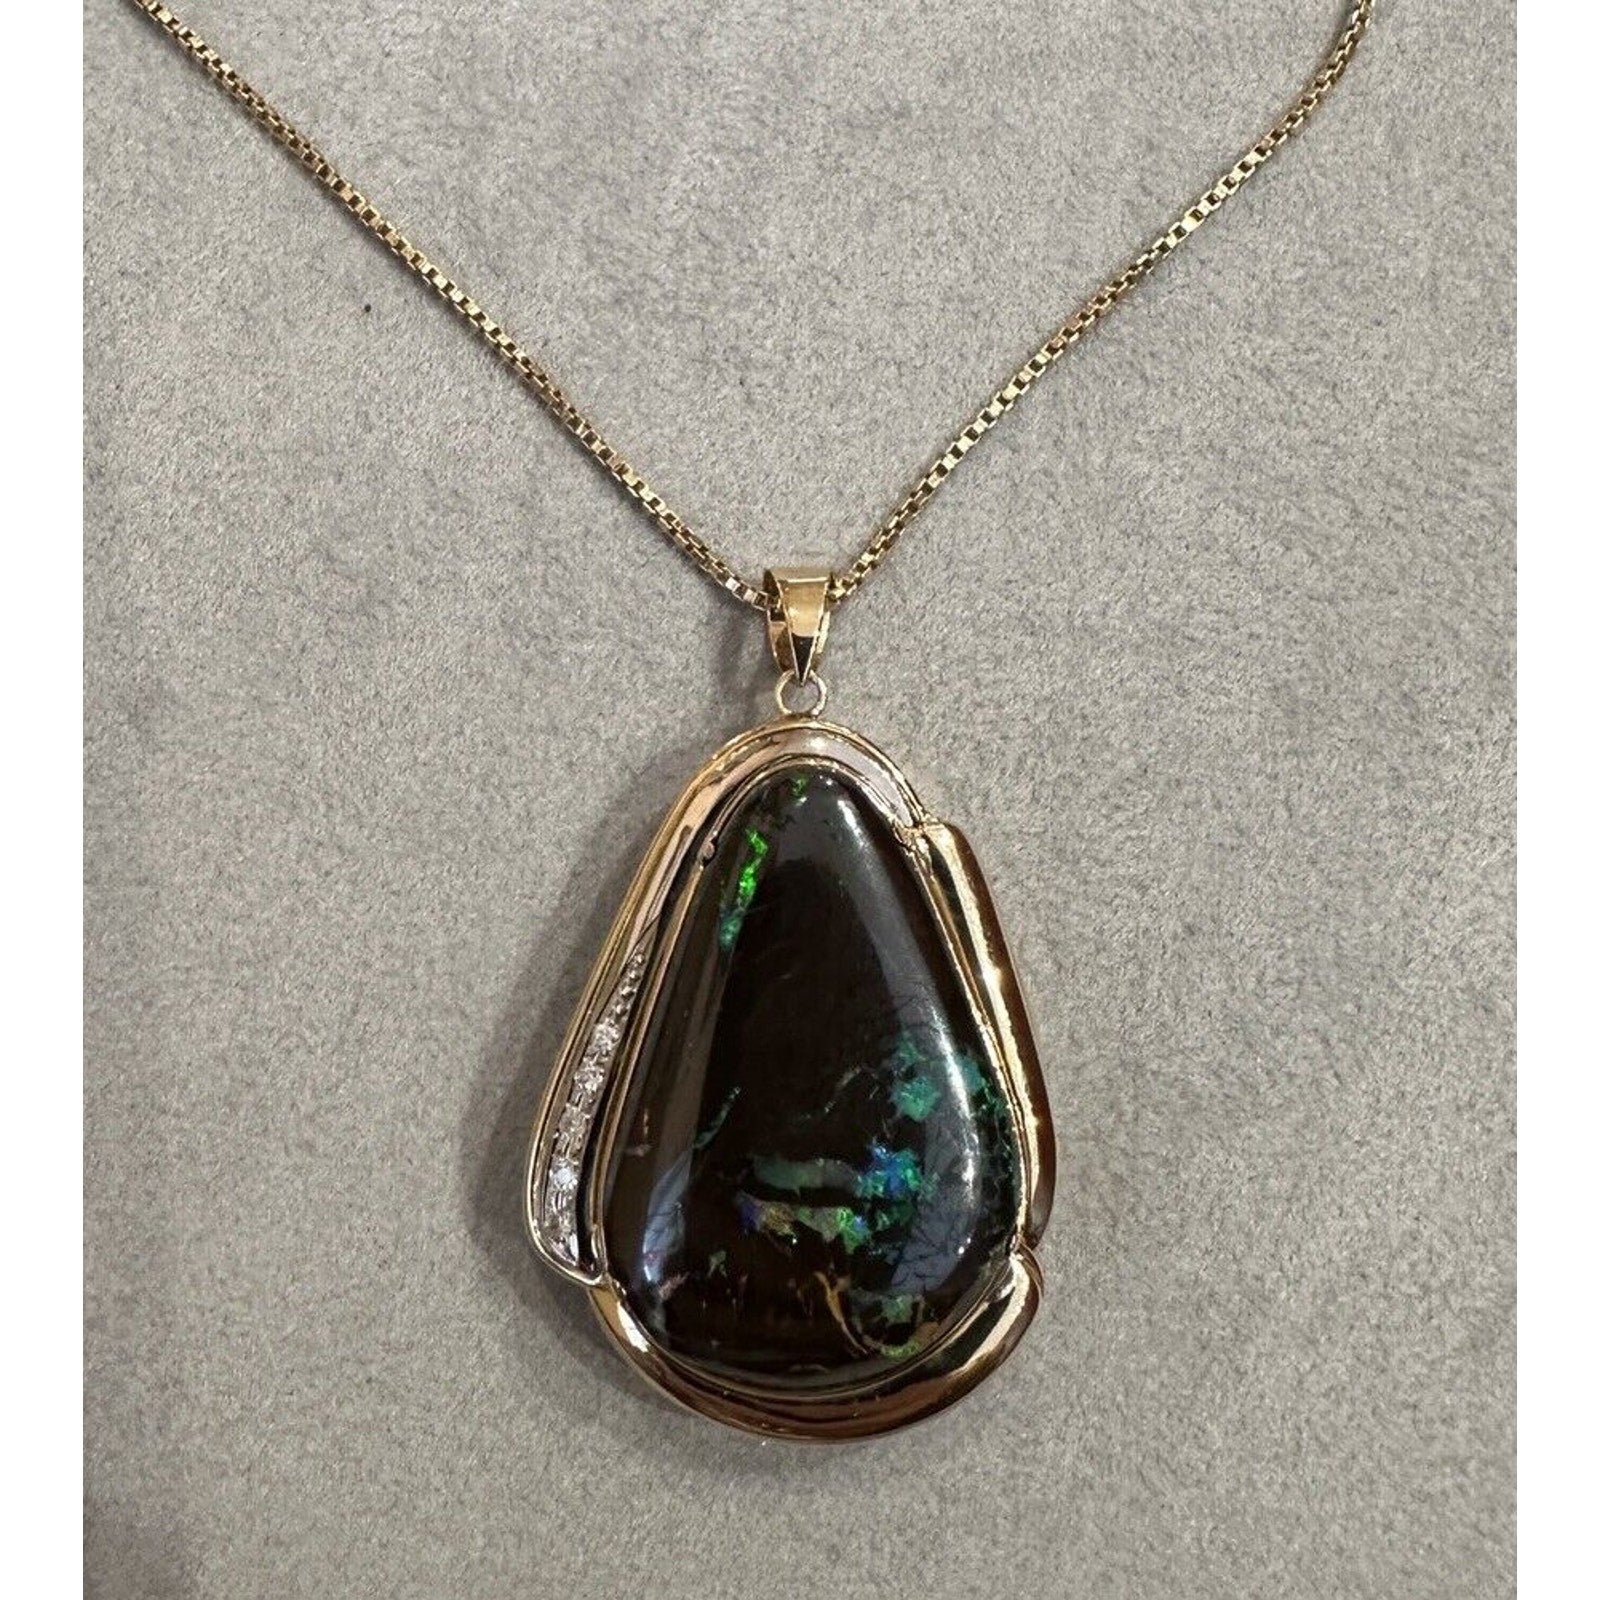 Large Boulder Opal Pendant Necklace with Diamonds in 18k/14k Yellow Gold